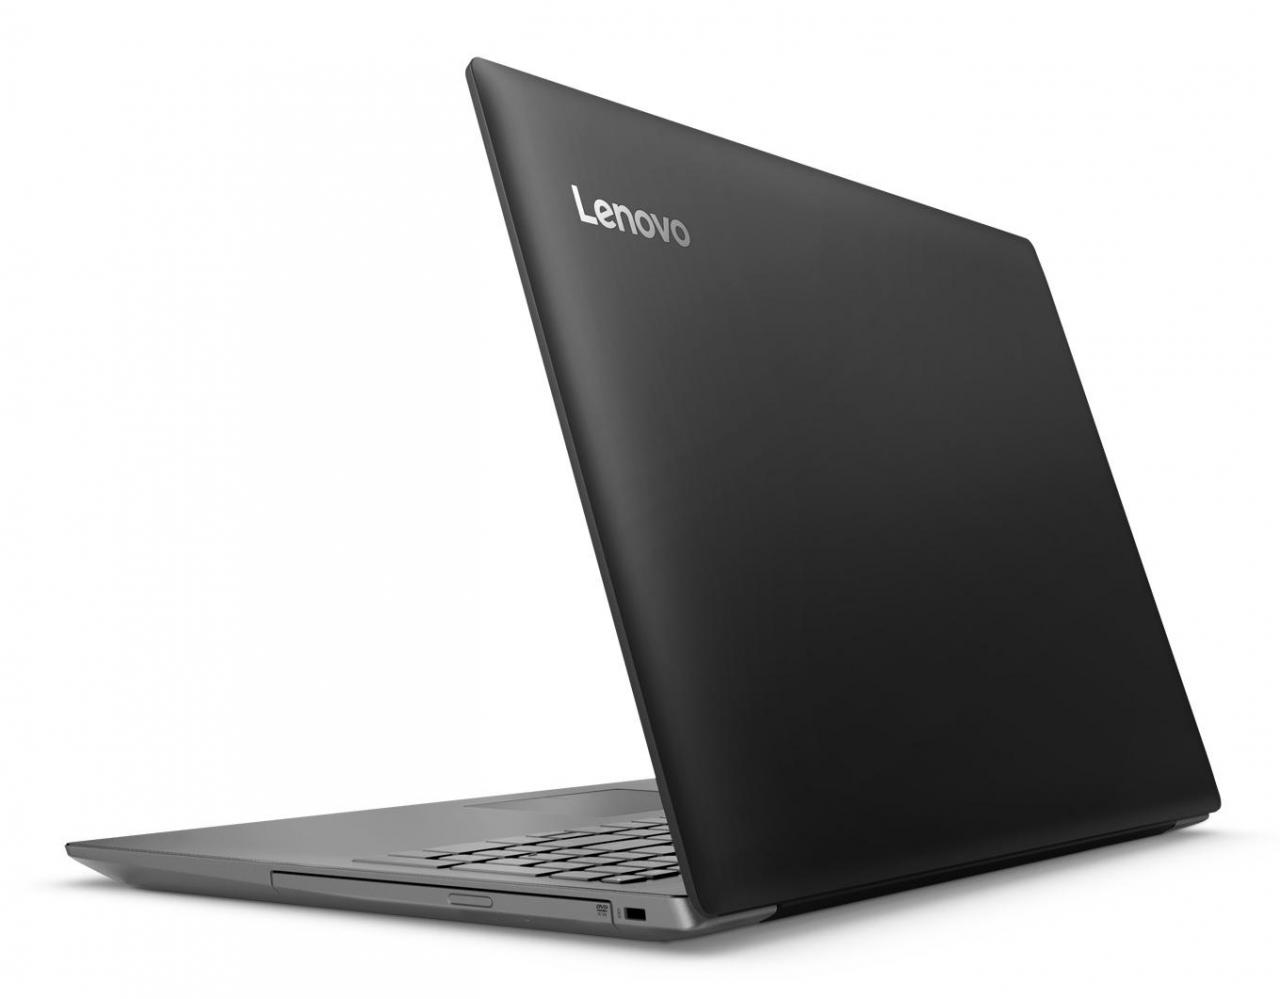 Lenovo IdeaPad 320-15AST Specs and Details